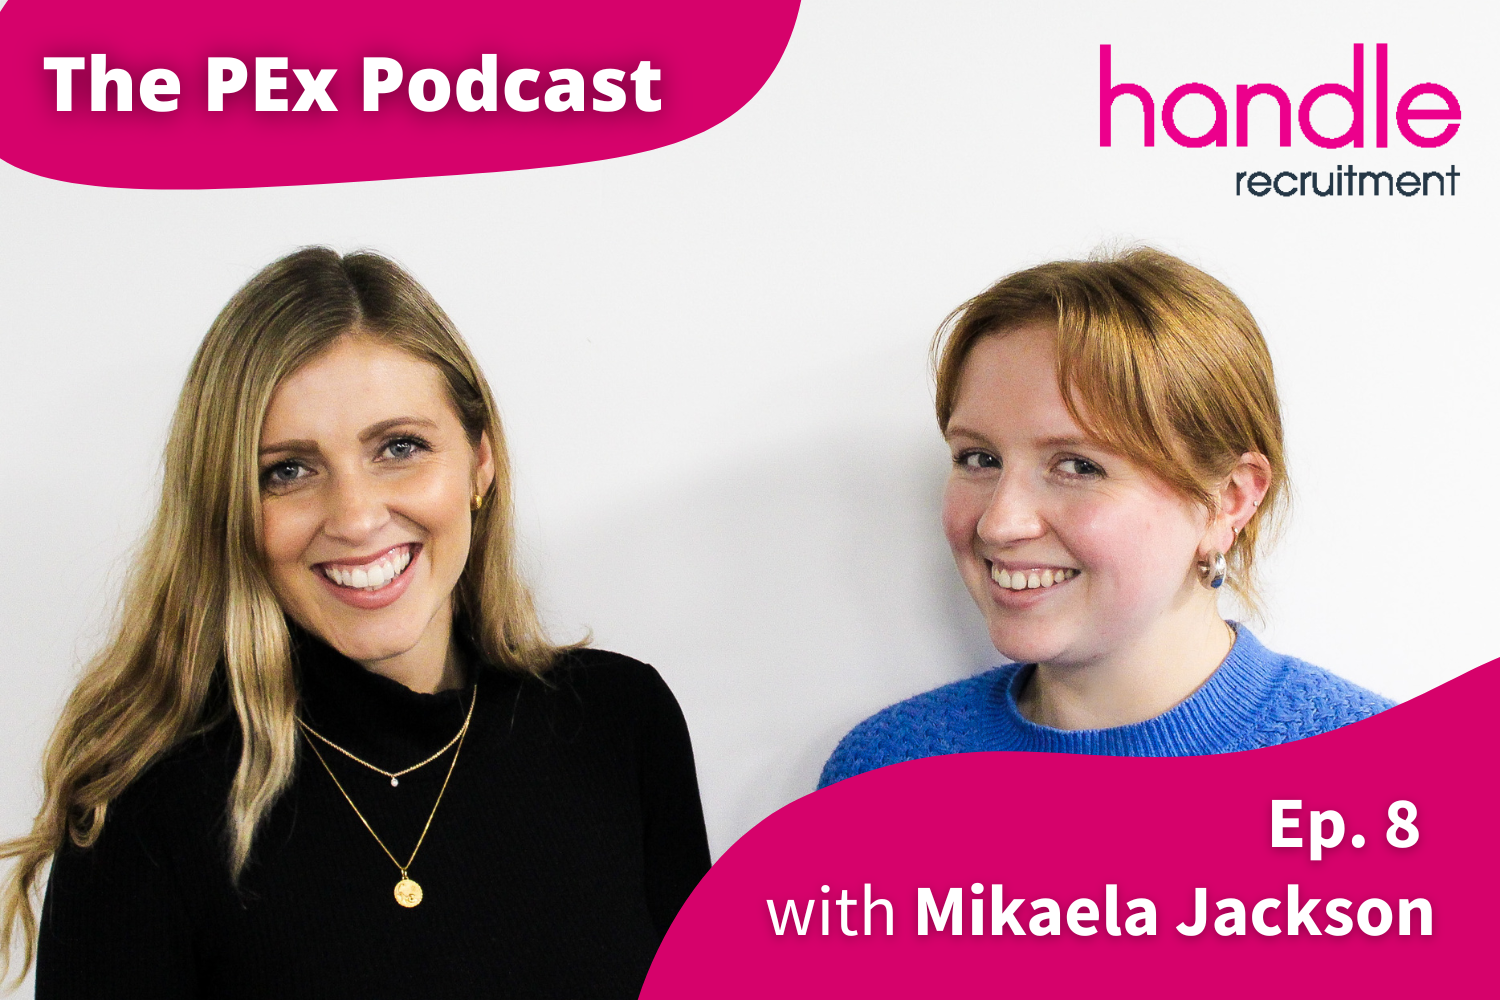 PEx Podcast - Are we in a confidence crisis? With Mikaela Jackson